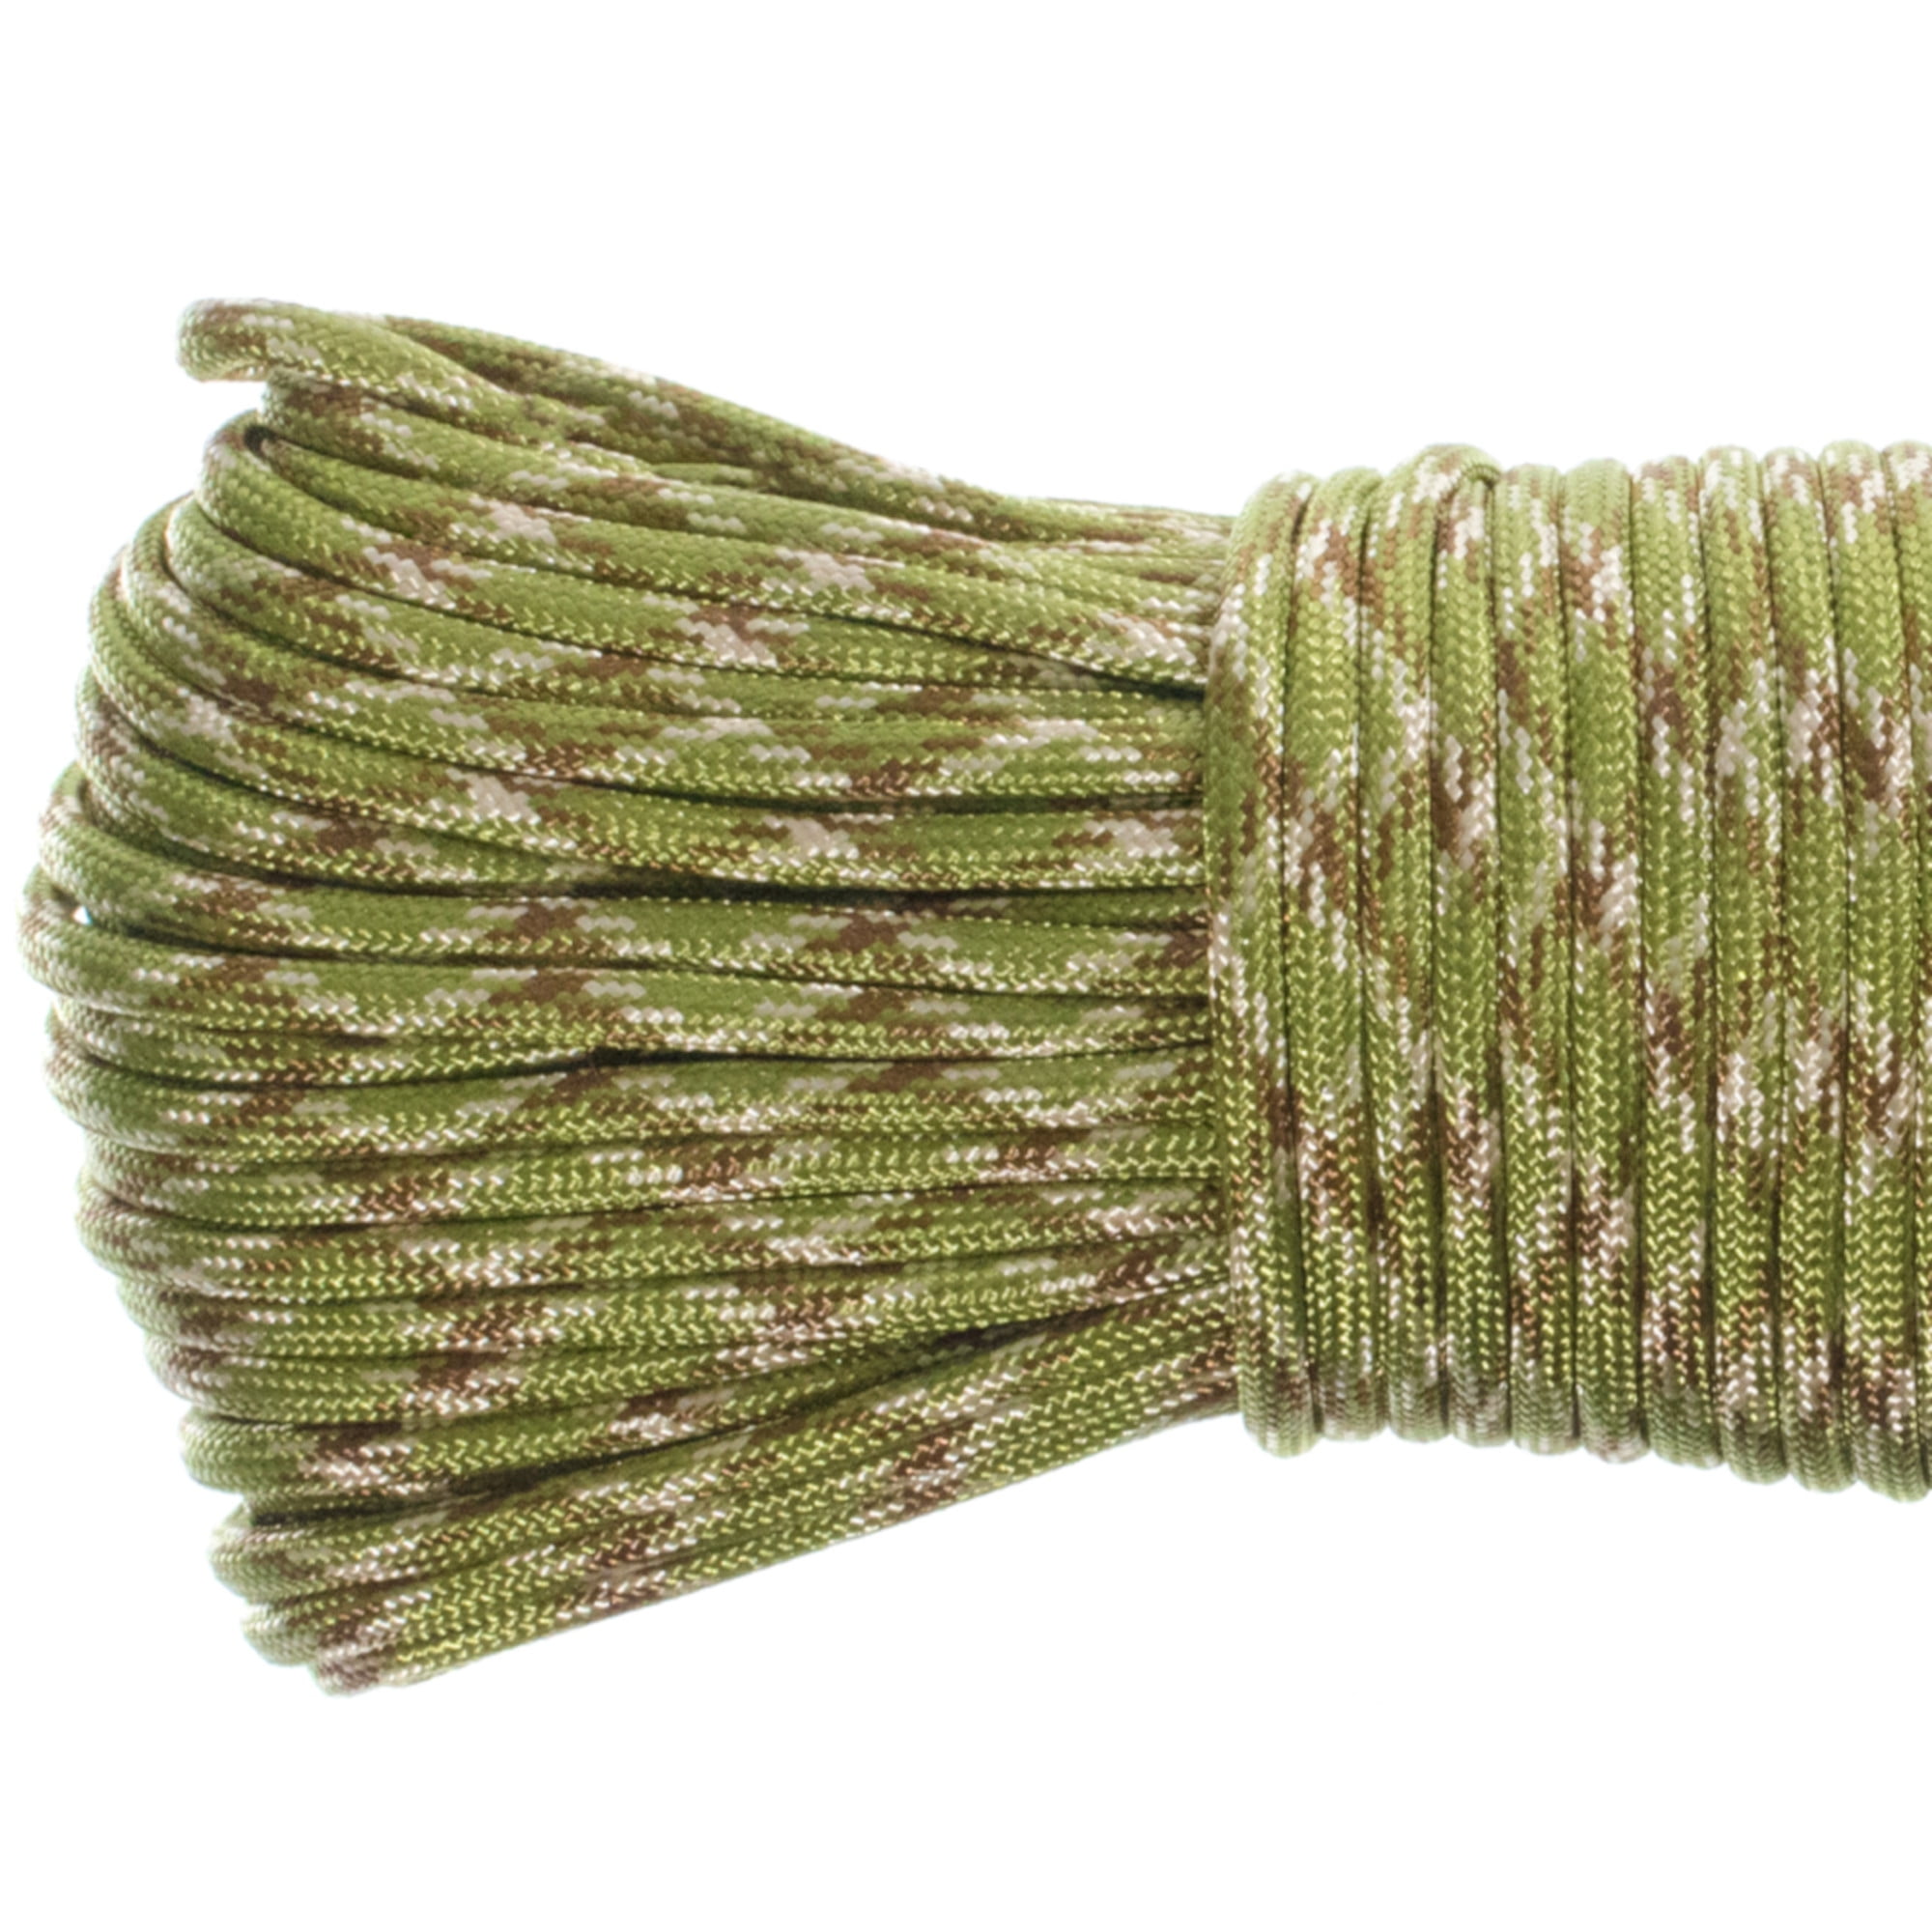 100 Foot Lengths Camo Color Paracord Choices of 550 LB Tensile Strength with Twisted Inner 7 Strand Removable Core Camouflage Parachute Cord in 10 25 50 